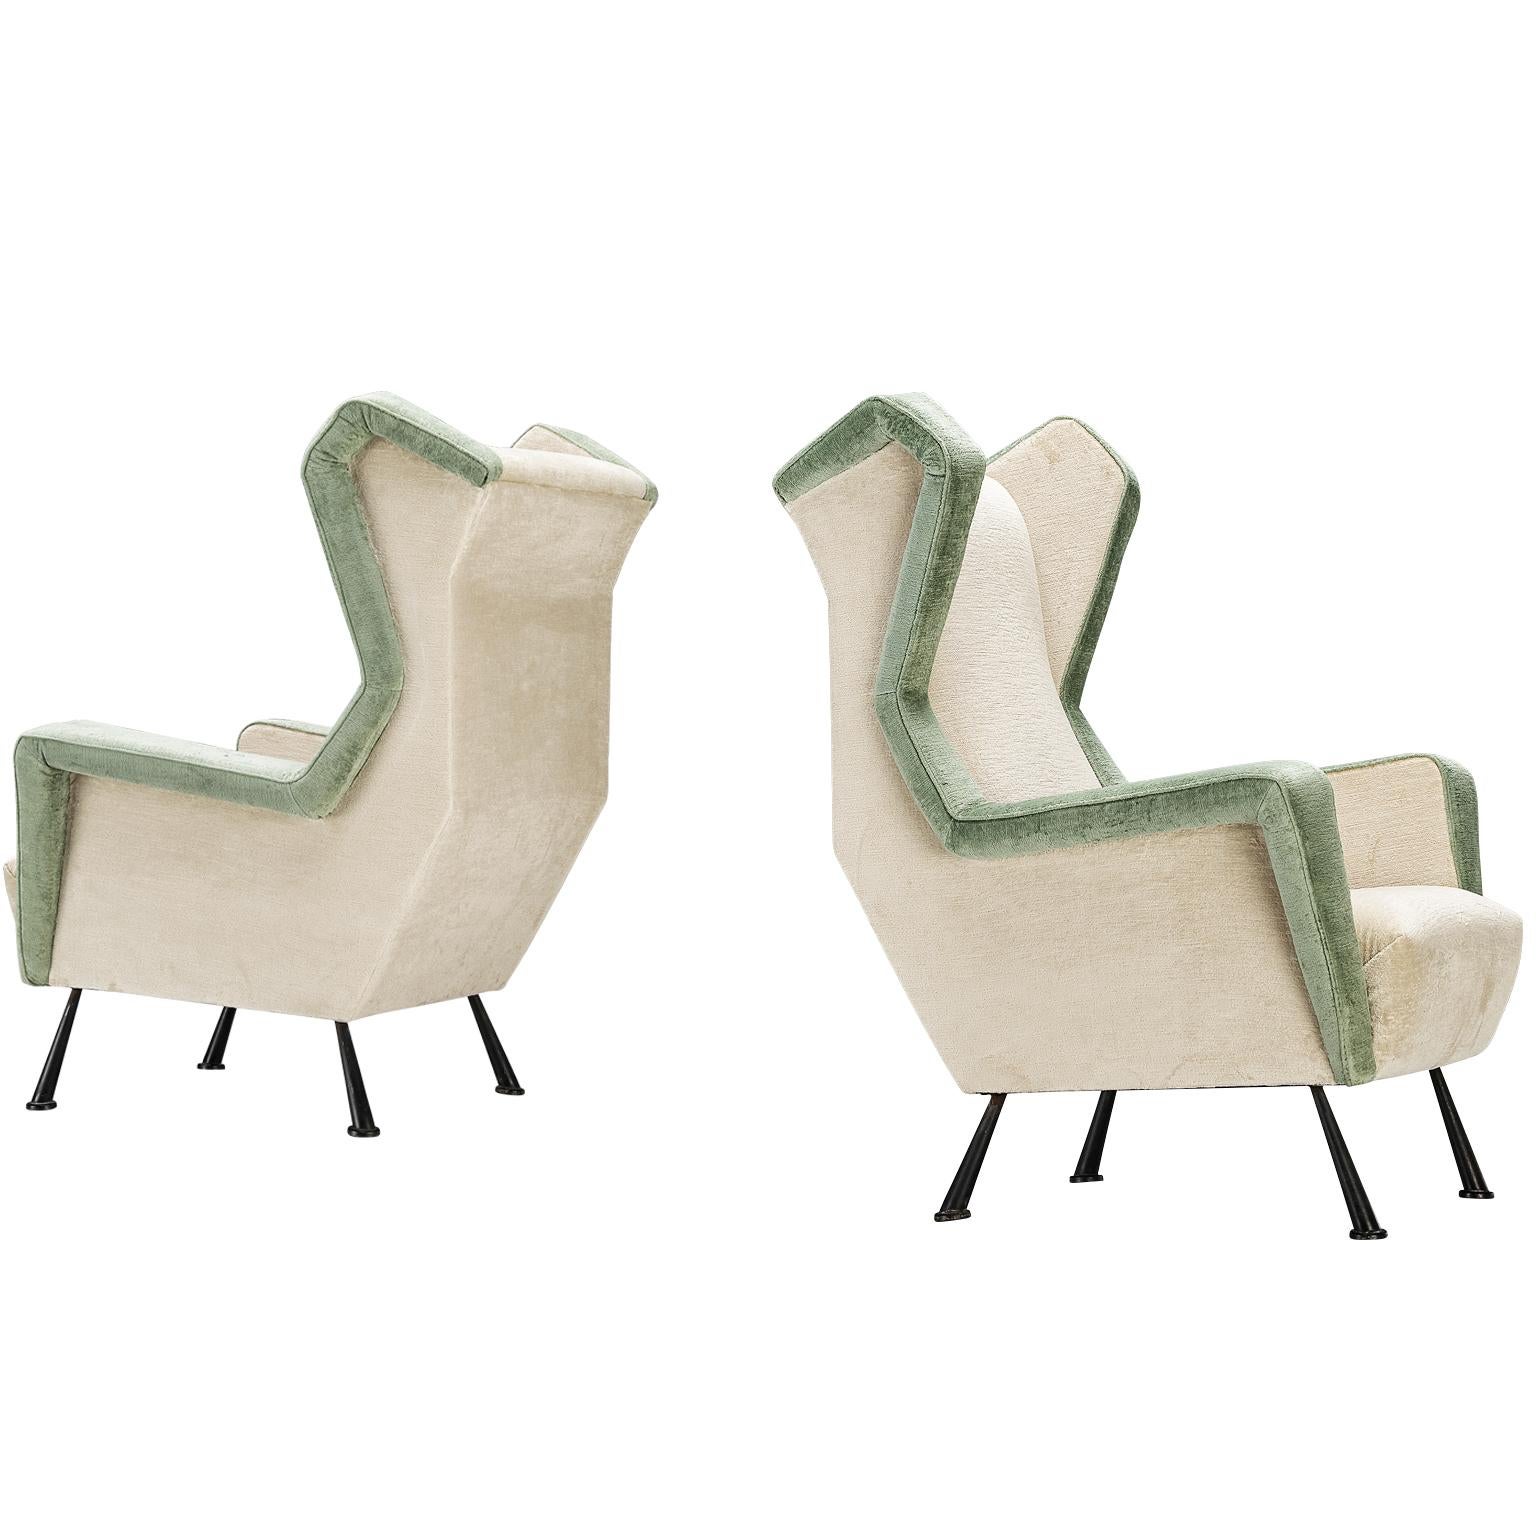 Italian Pair of Angular Lounge Chairs in Pierre Frey Velvet Upholstery For Sale